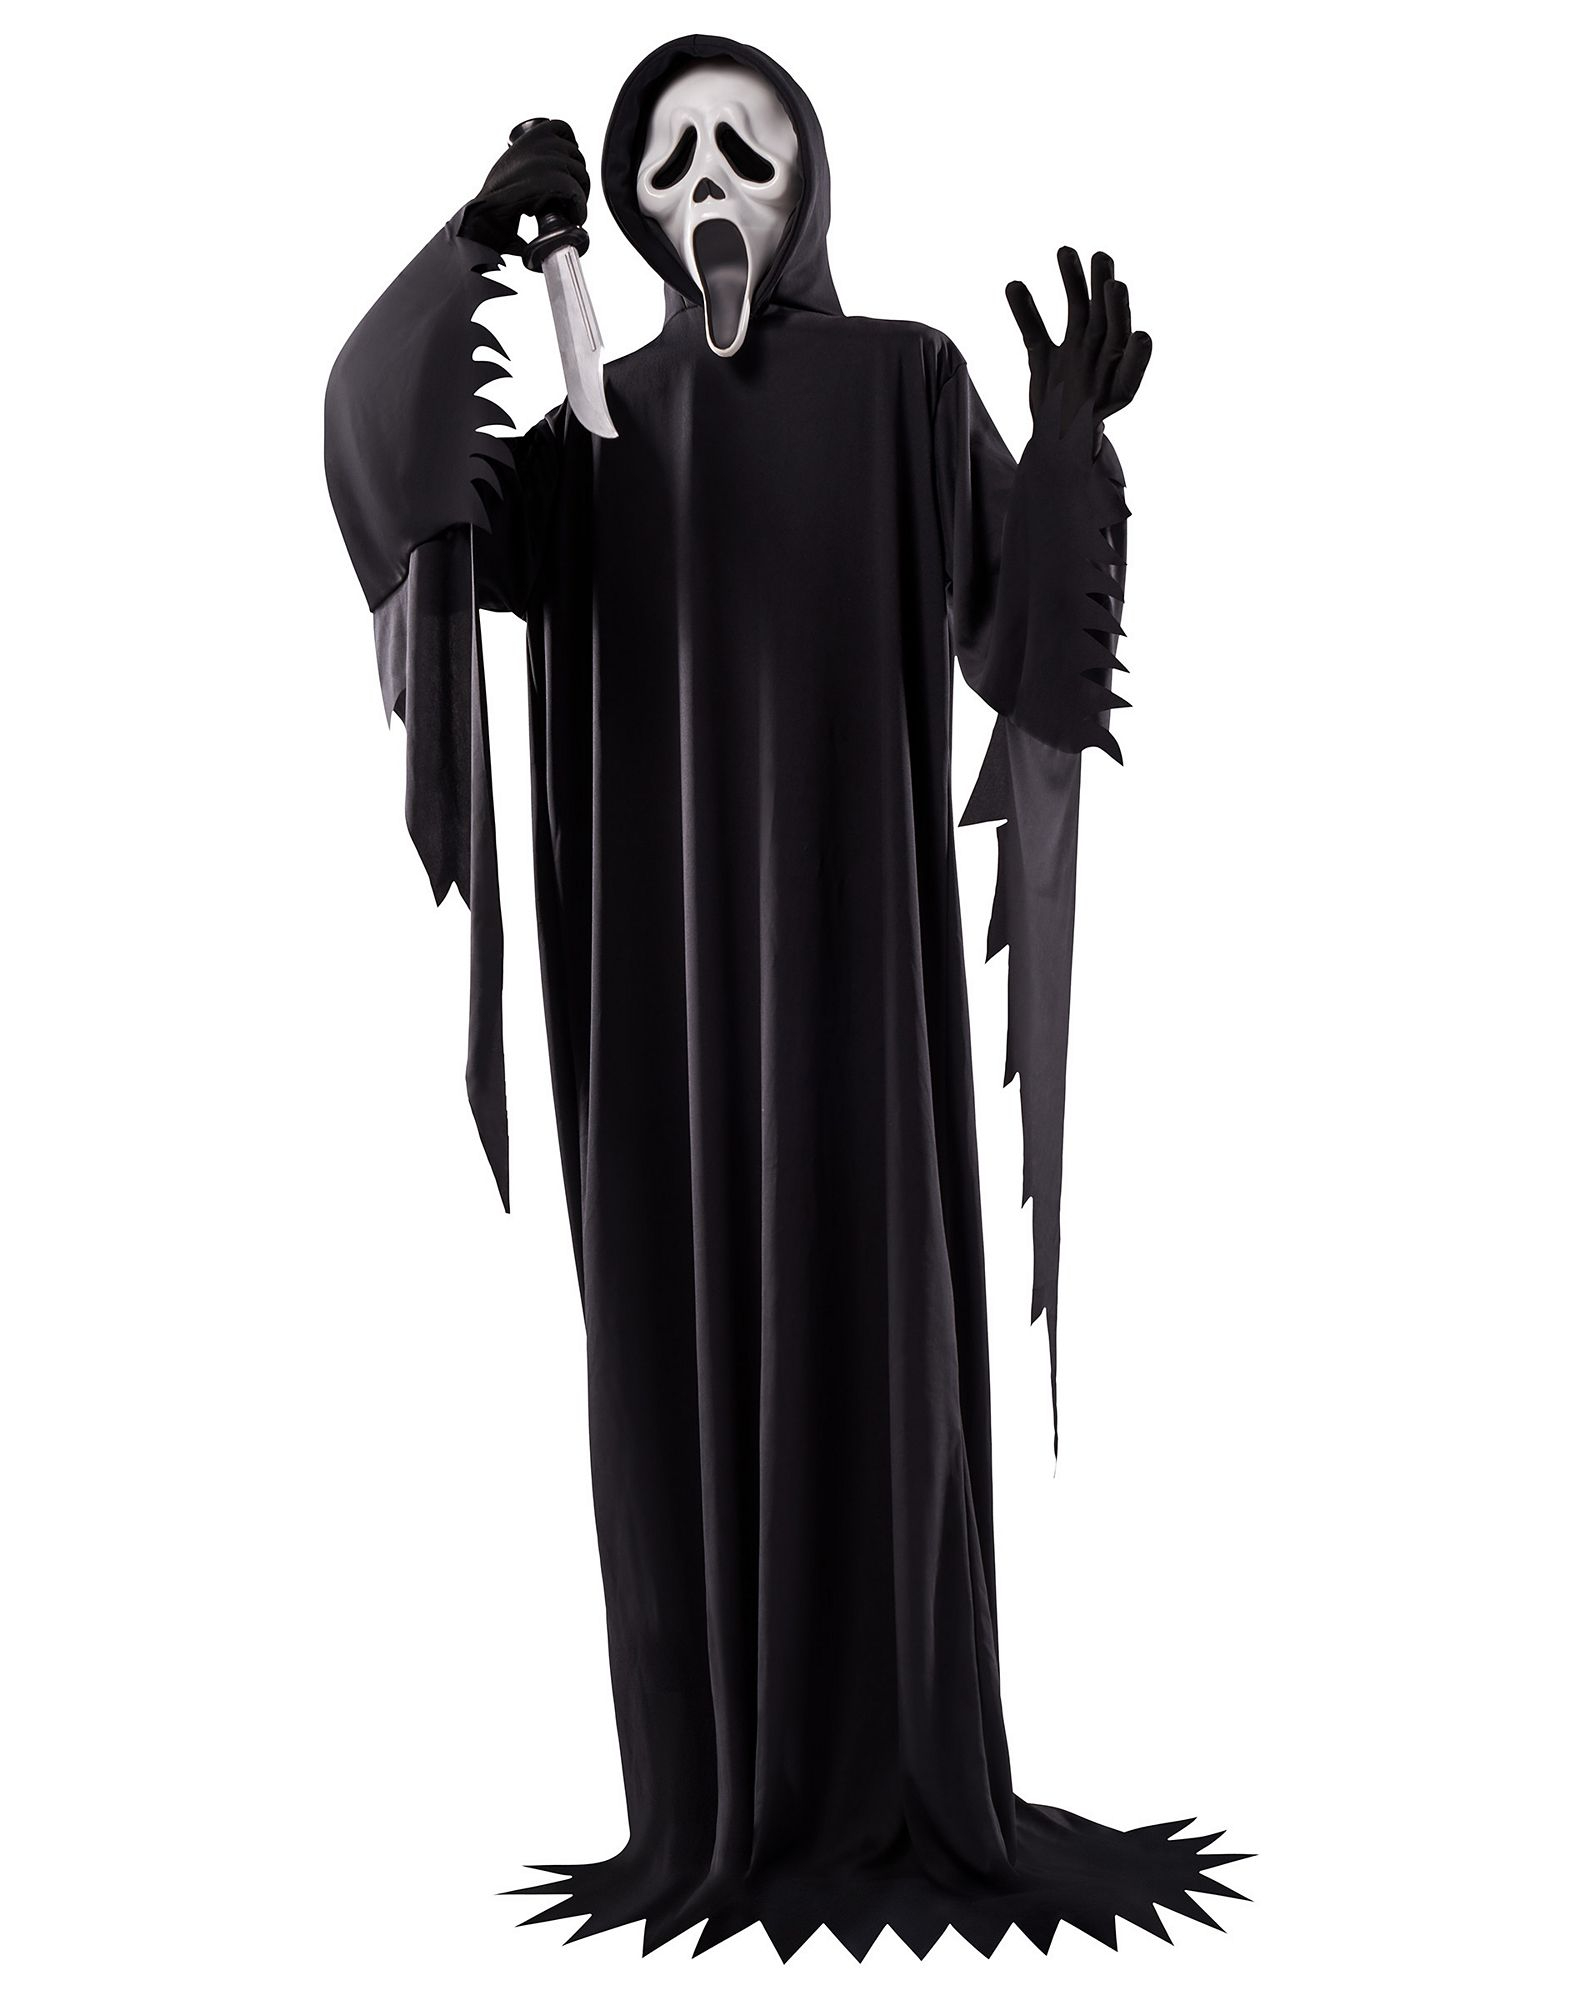 Standing 6 Foot Licensed Ghost Face Prop